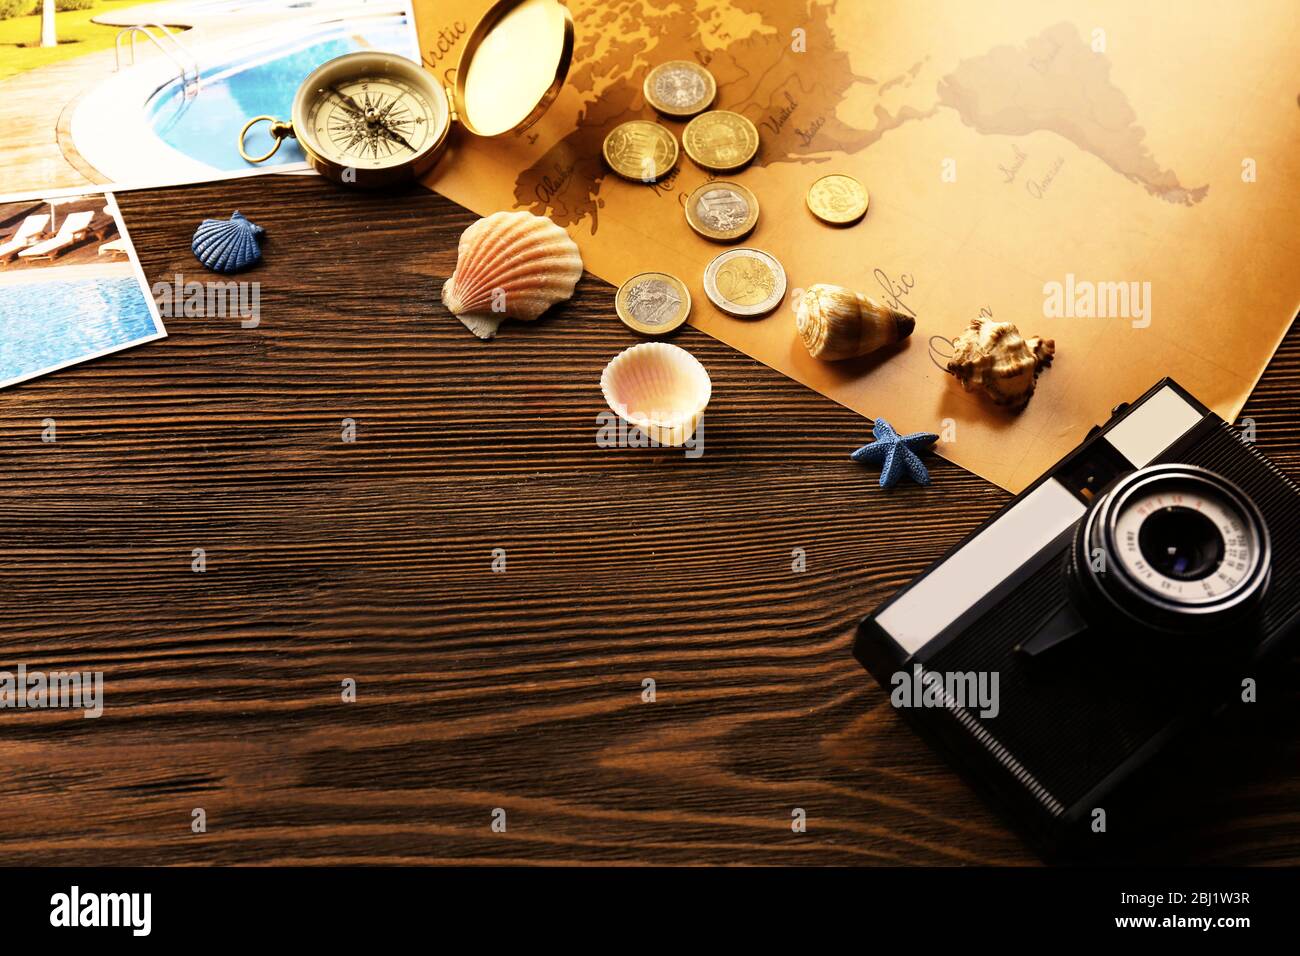 Beautiful composition with sea accessories on table close up Stock Photo